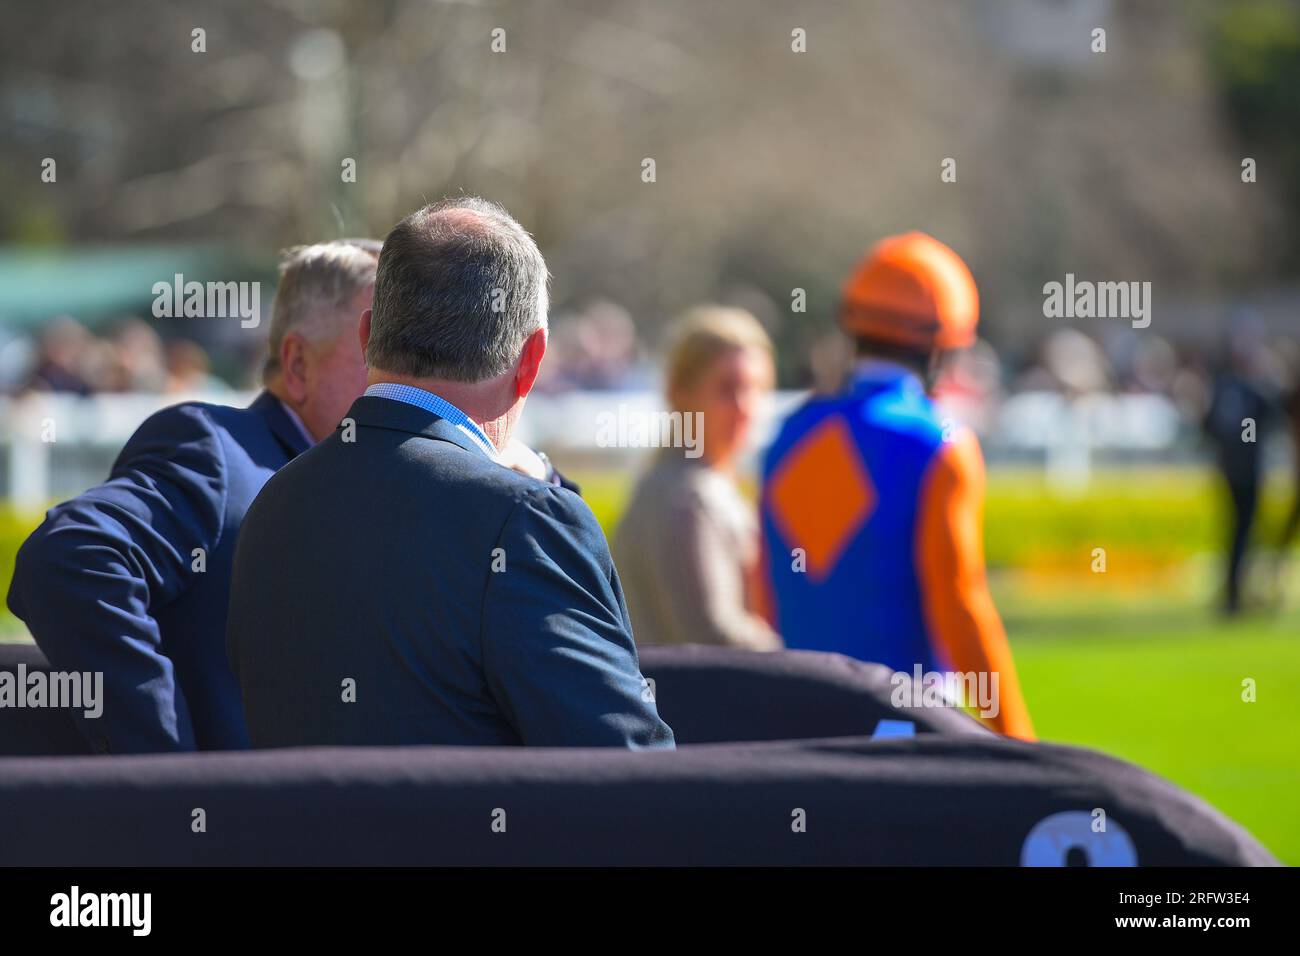 Spectators at the race track watching a jockey getting ready to mount the horse Stock Photo